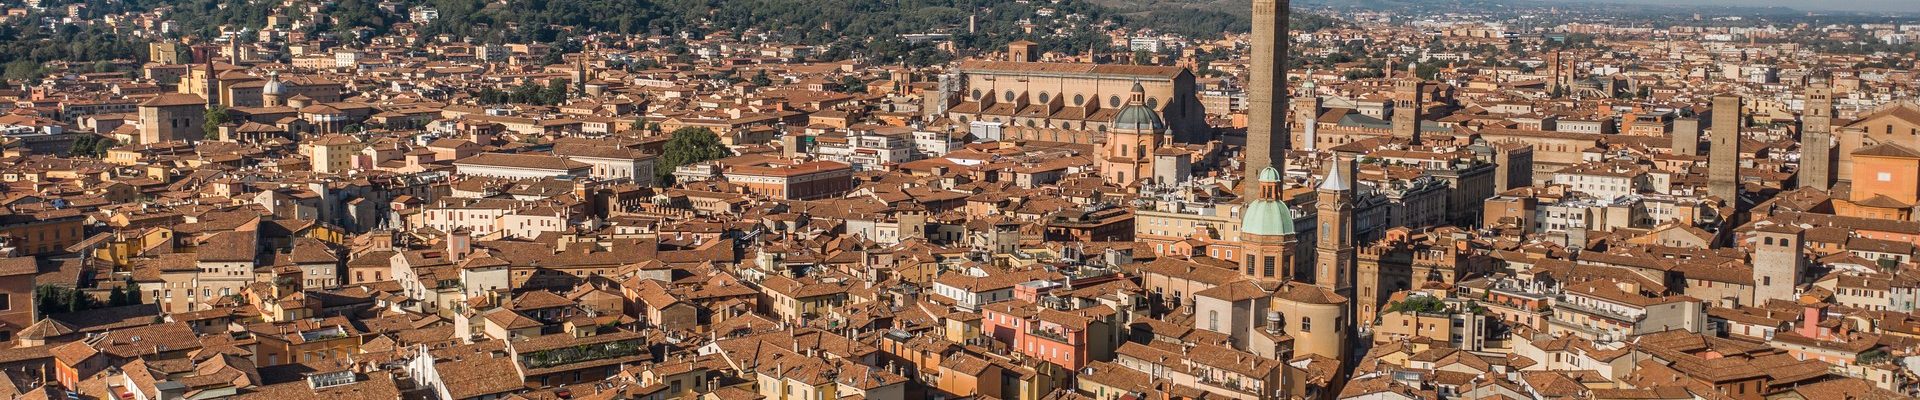 Aerial view of Bologna. Historic capital of the Emilia-Romagna region, in northern Italy